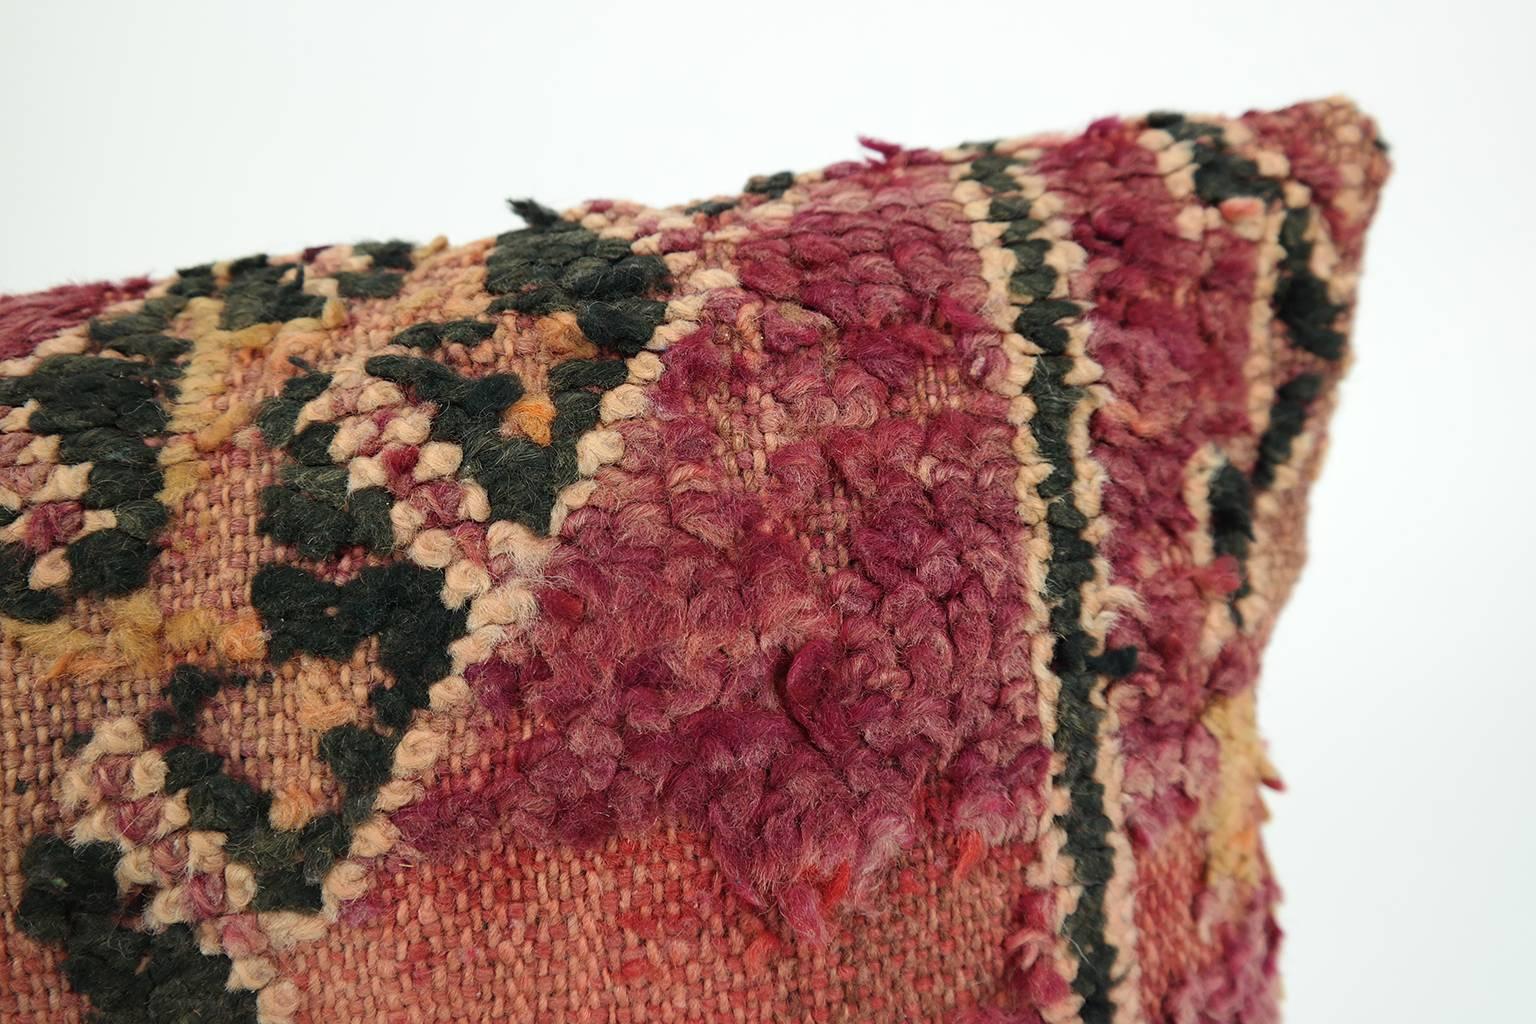 Cushion custom made from a more than 50 years old Moroccan rug, searched and selected by ourselves. This pillow is a one-of-a-kind with beautiful deep warm aubergine and red colors. The beauty of our pillows is that they are timeless and blend in